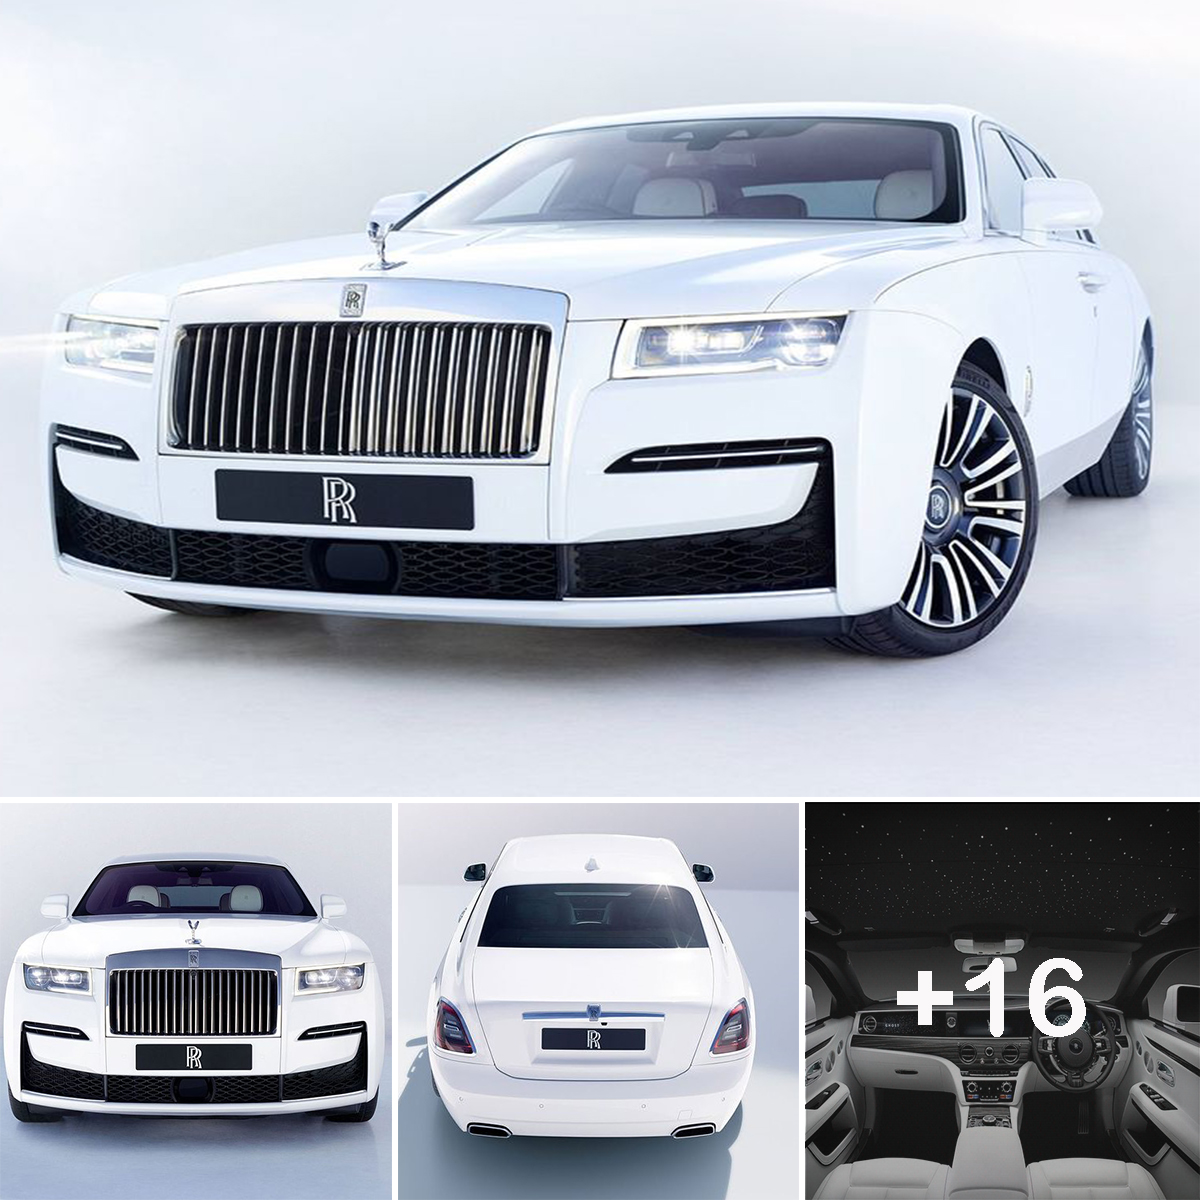 First Look! This is the all-new Rolls-Royce Ghost